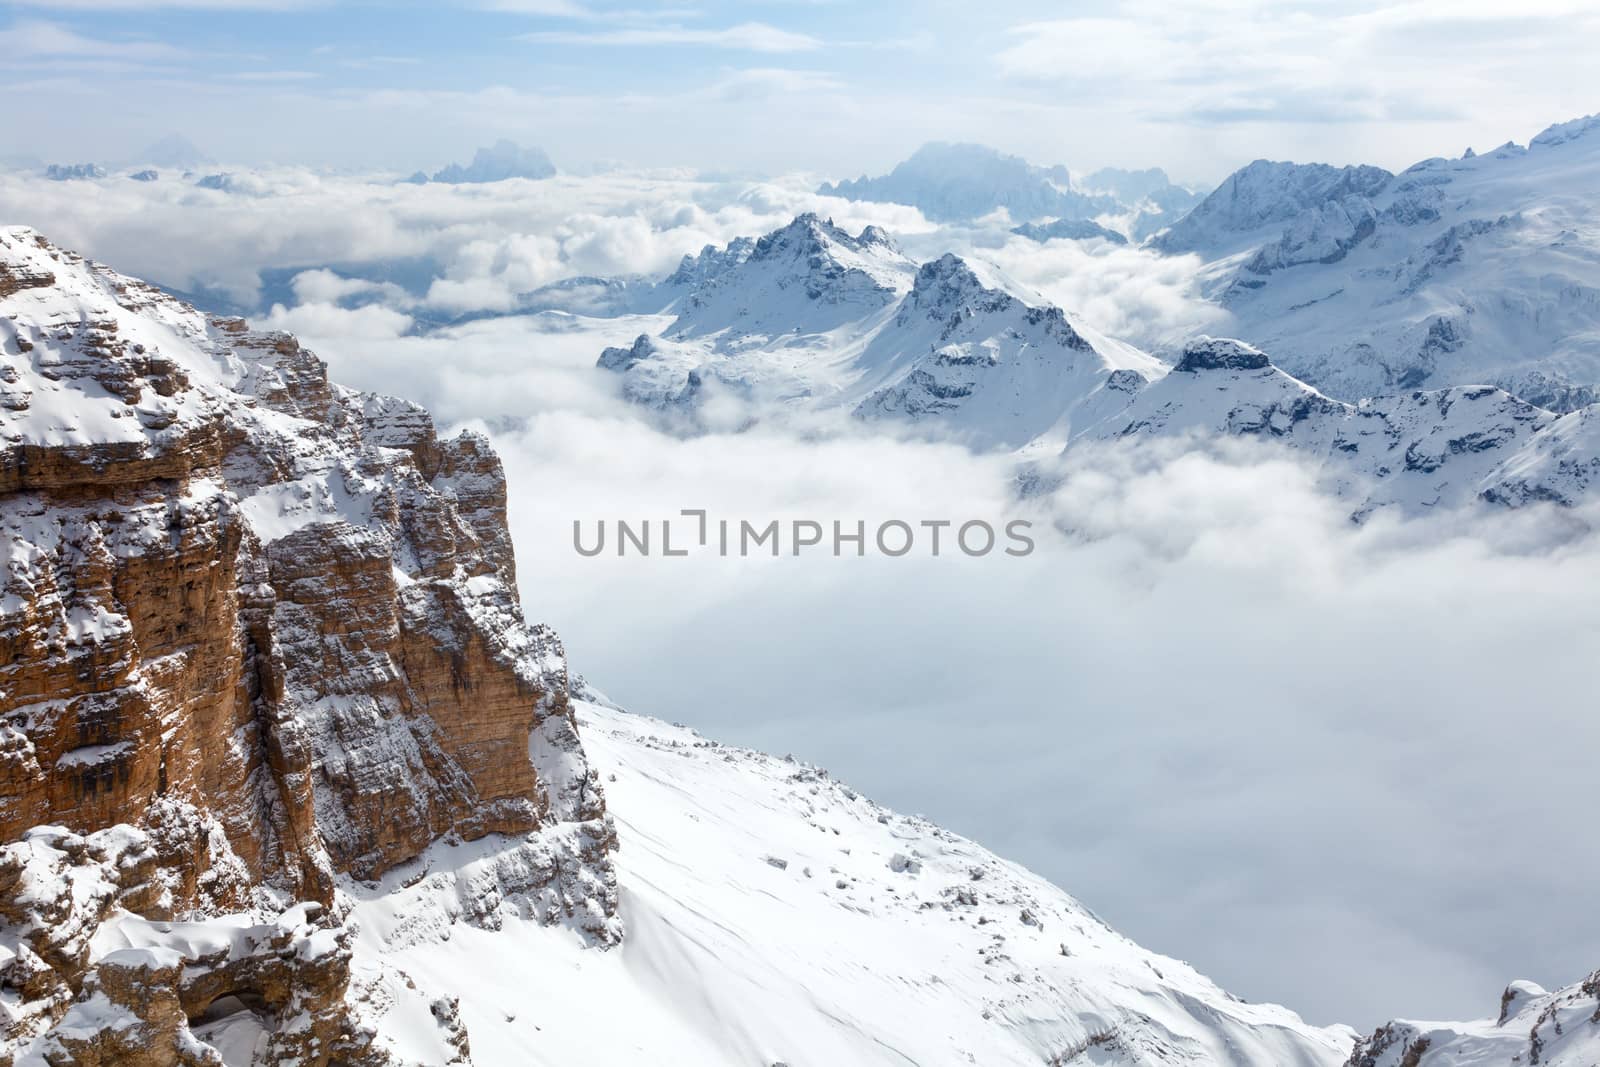 Italian Alps with the Sella group in front and the Marmolada group in background